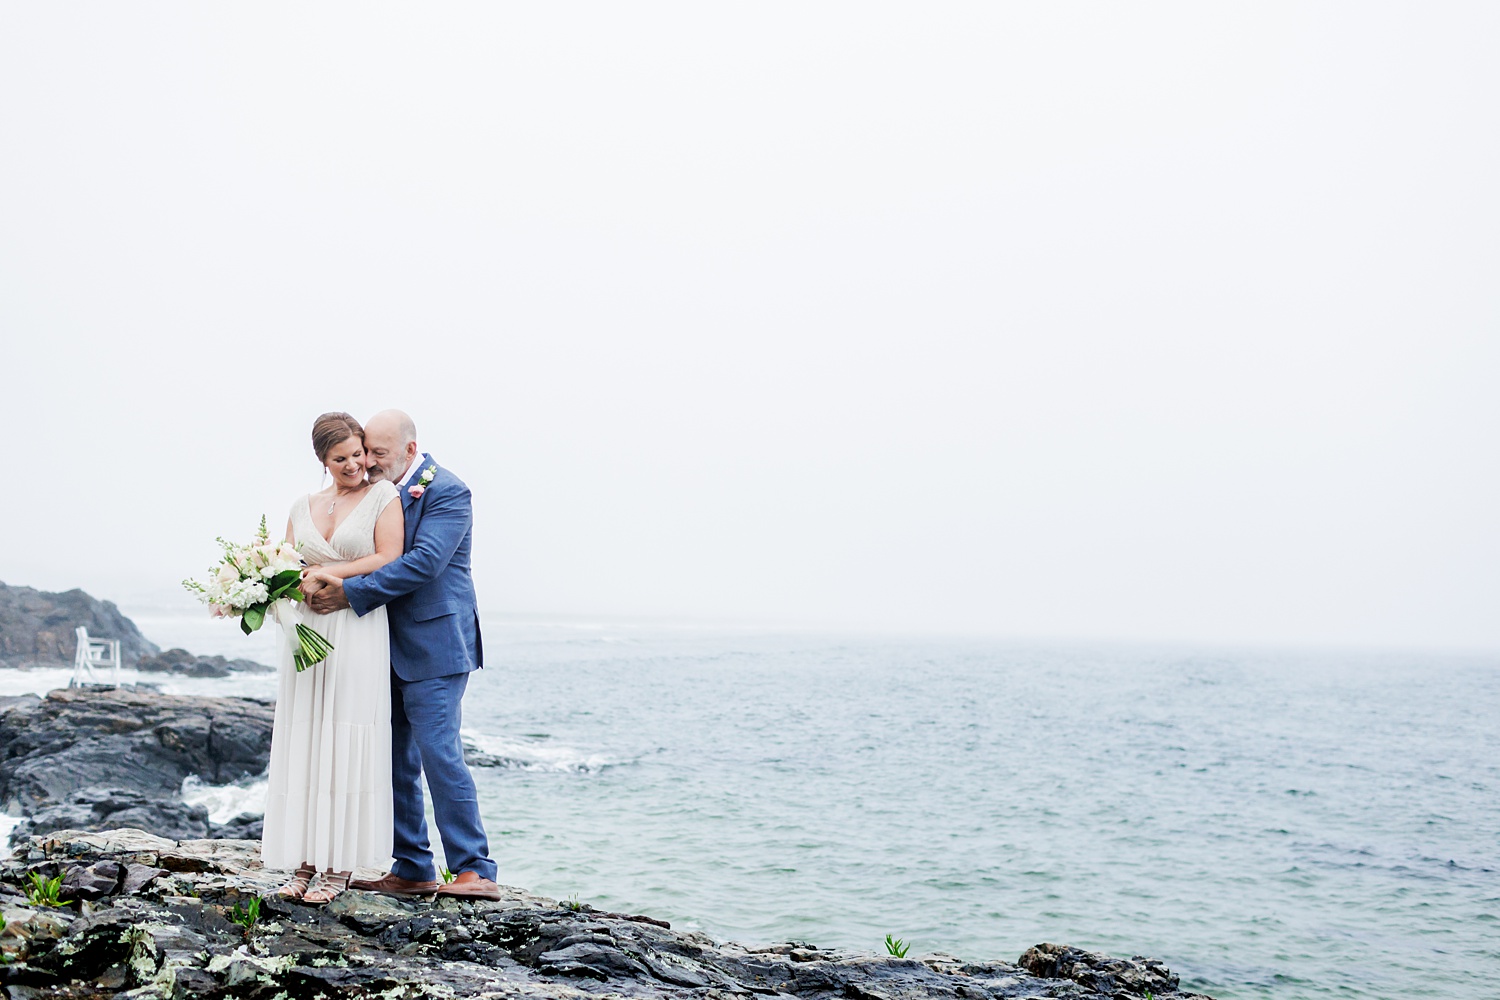 A snuggle on the cliffs overlooking the views on Marginal Way Maine for the couple who eloped